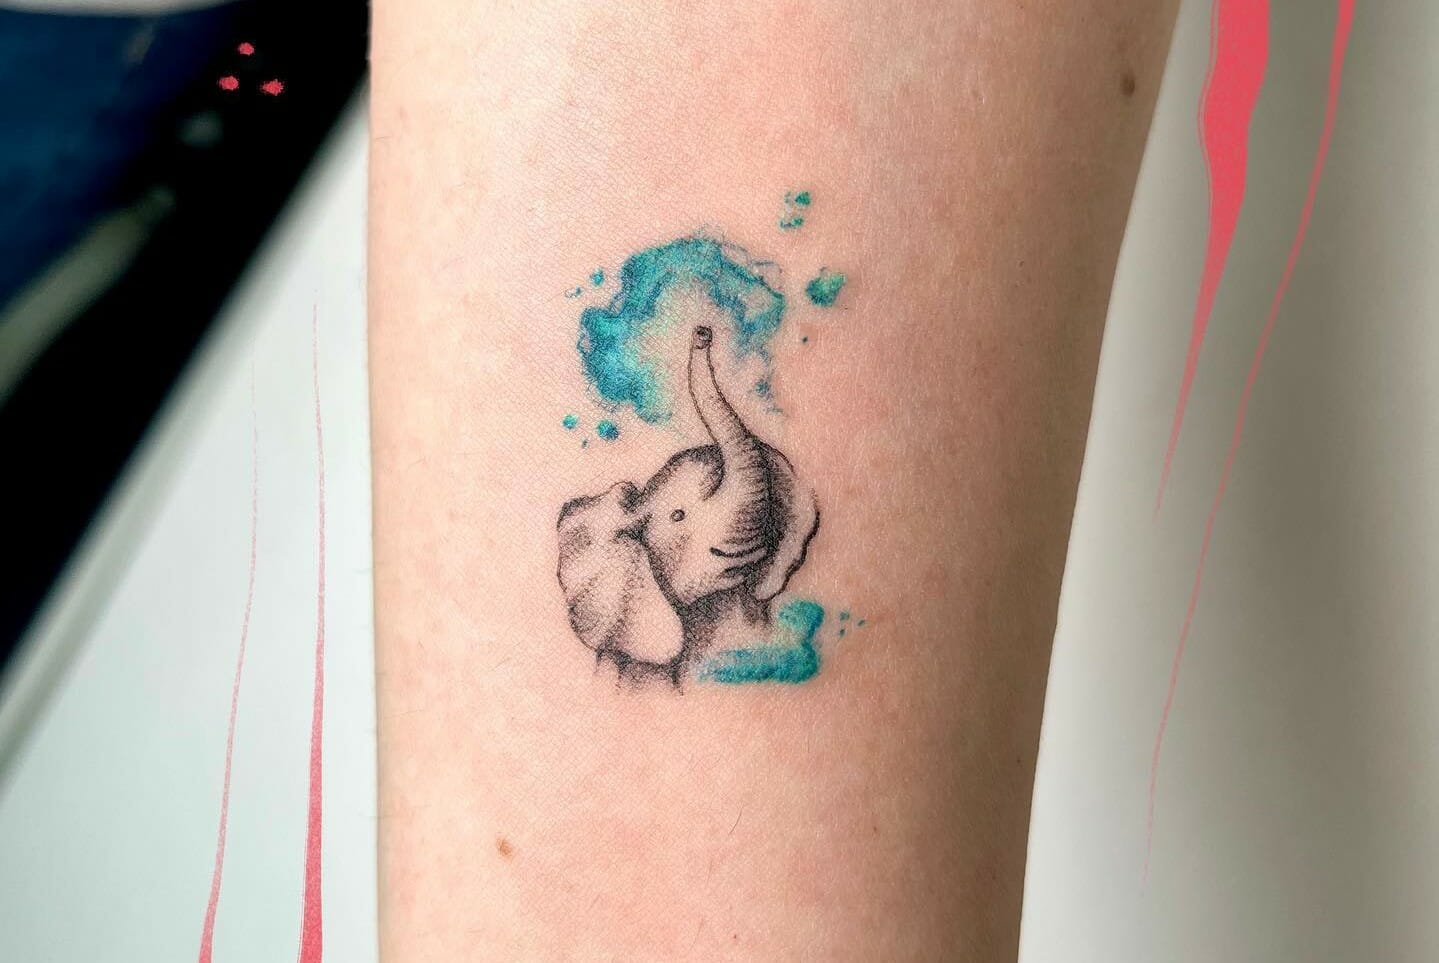 12 Different Elephant Tattoo Ideas With Meaning - Greenorc